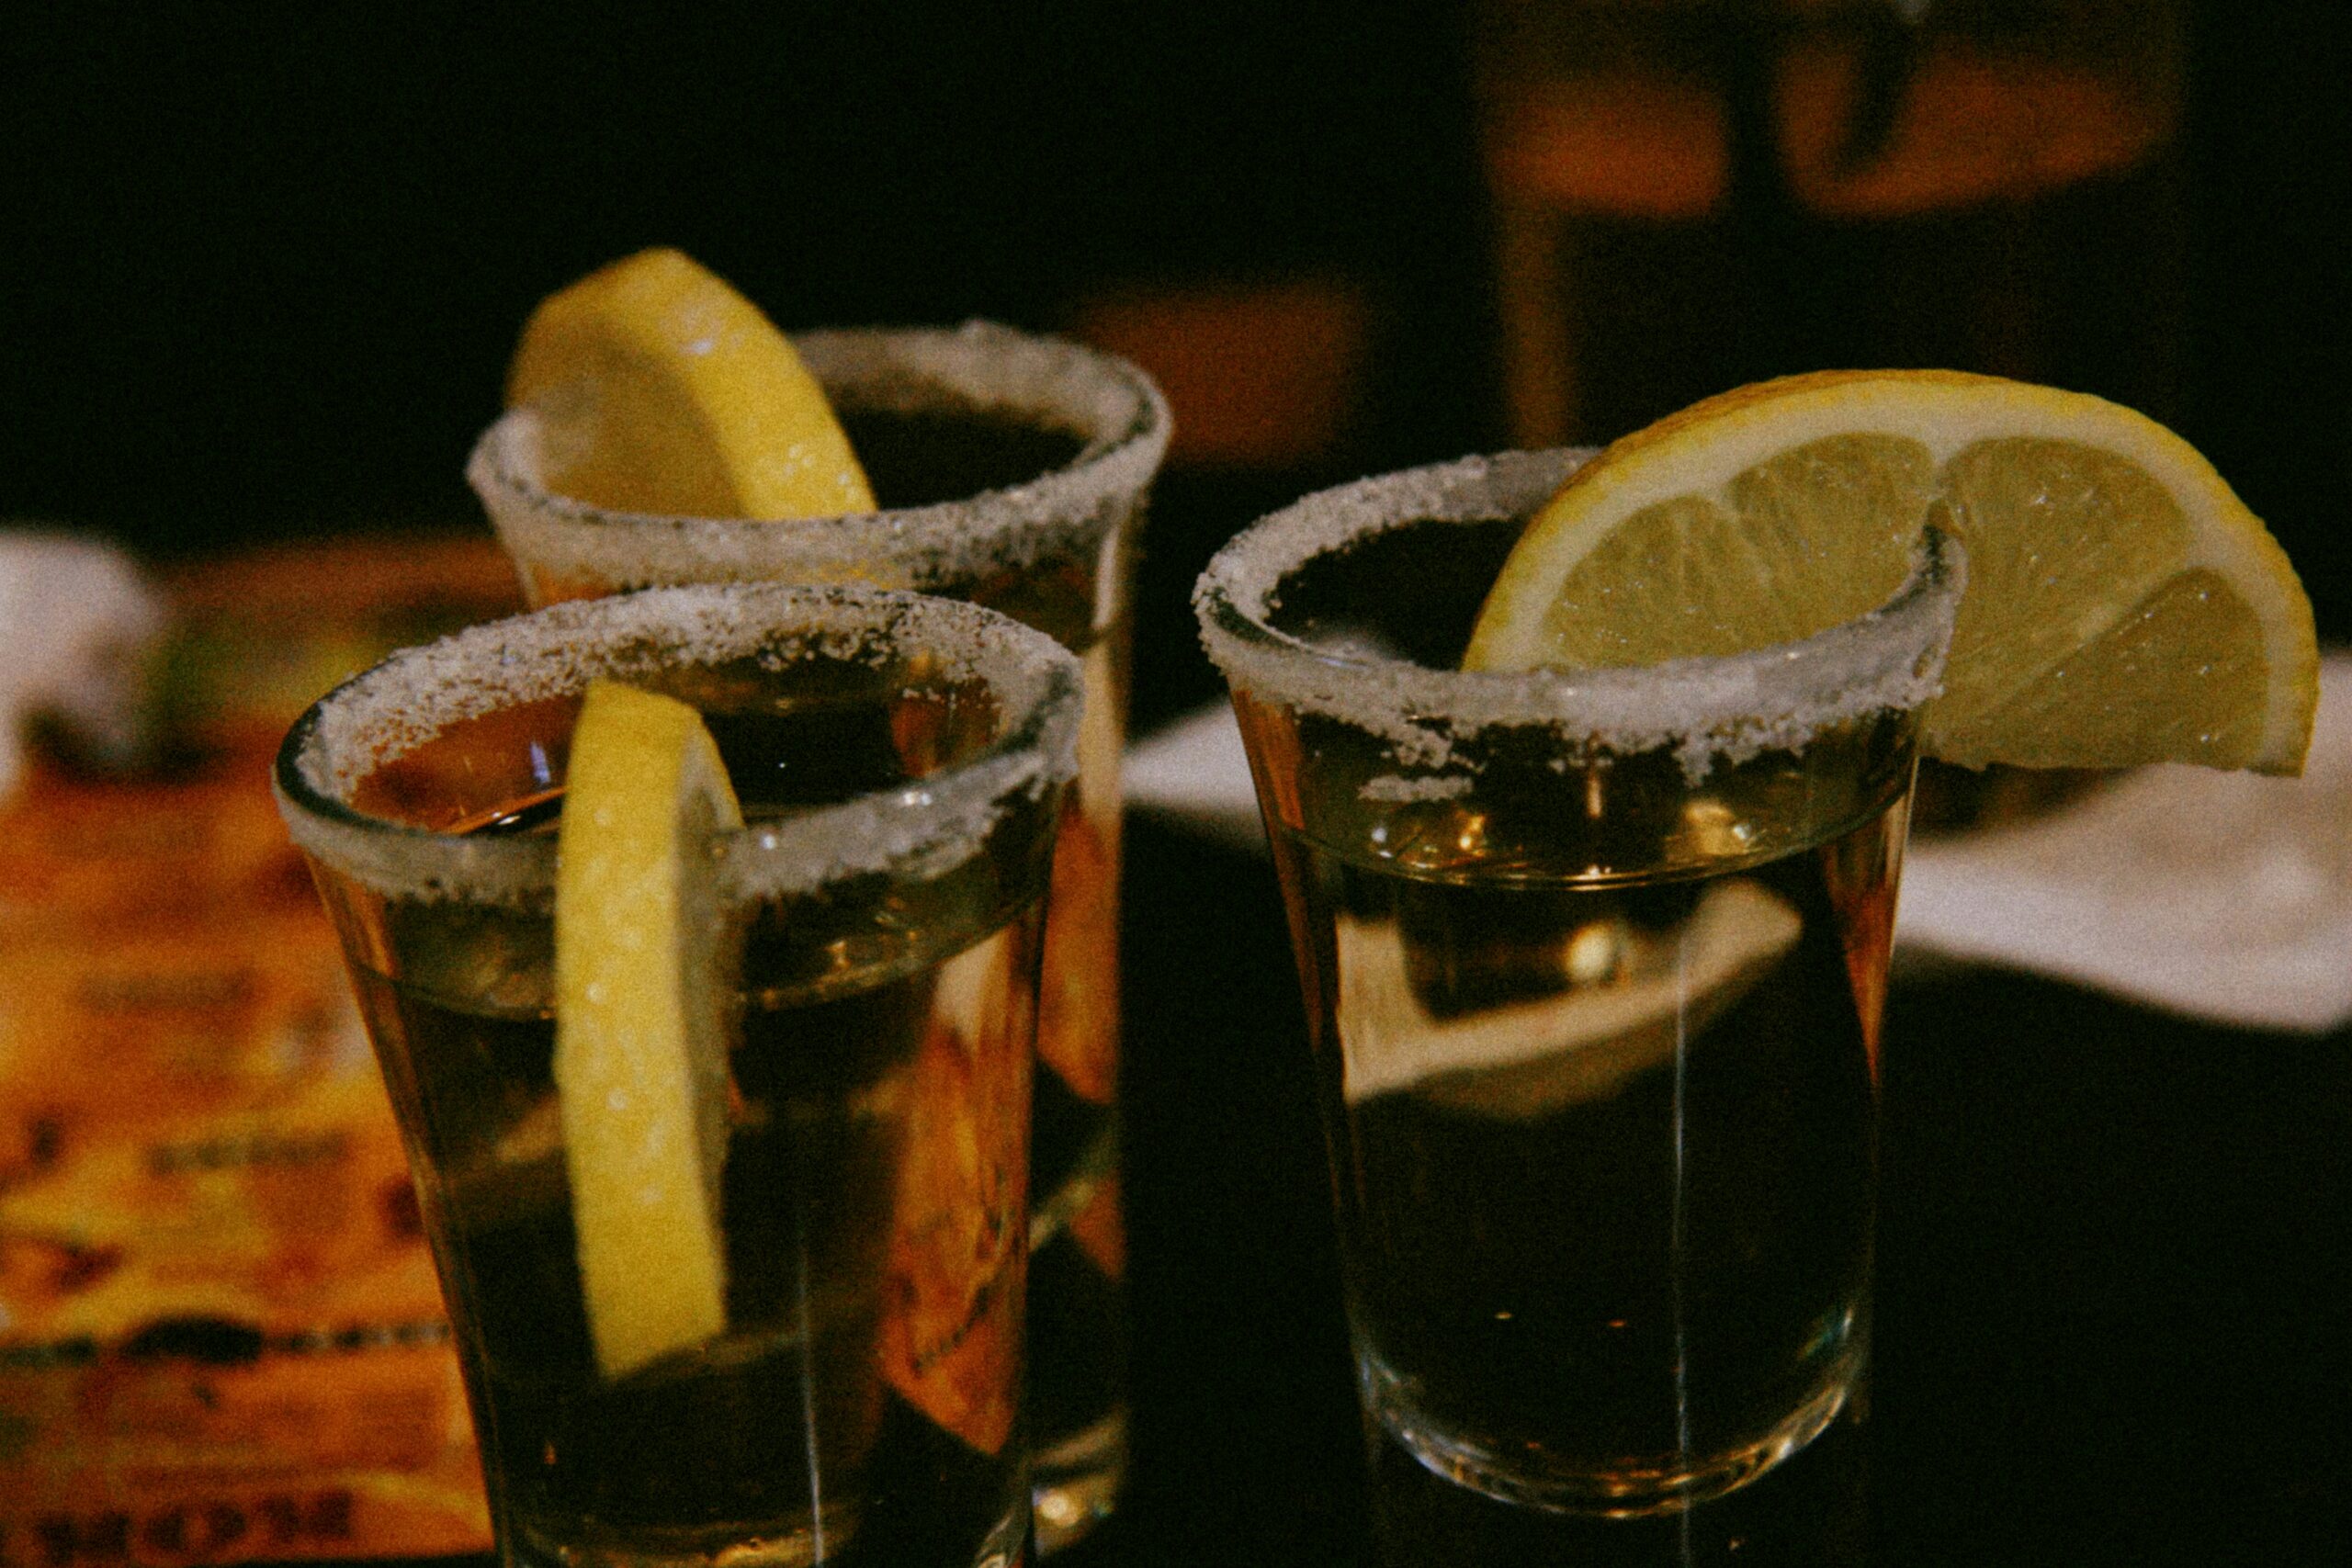 What pairs well with tequila? Lemon and lime pair with a tequila shot. Pictured: Tequila shots